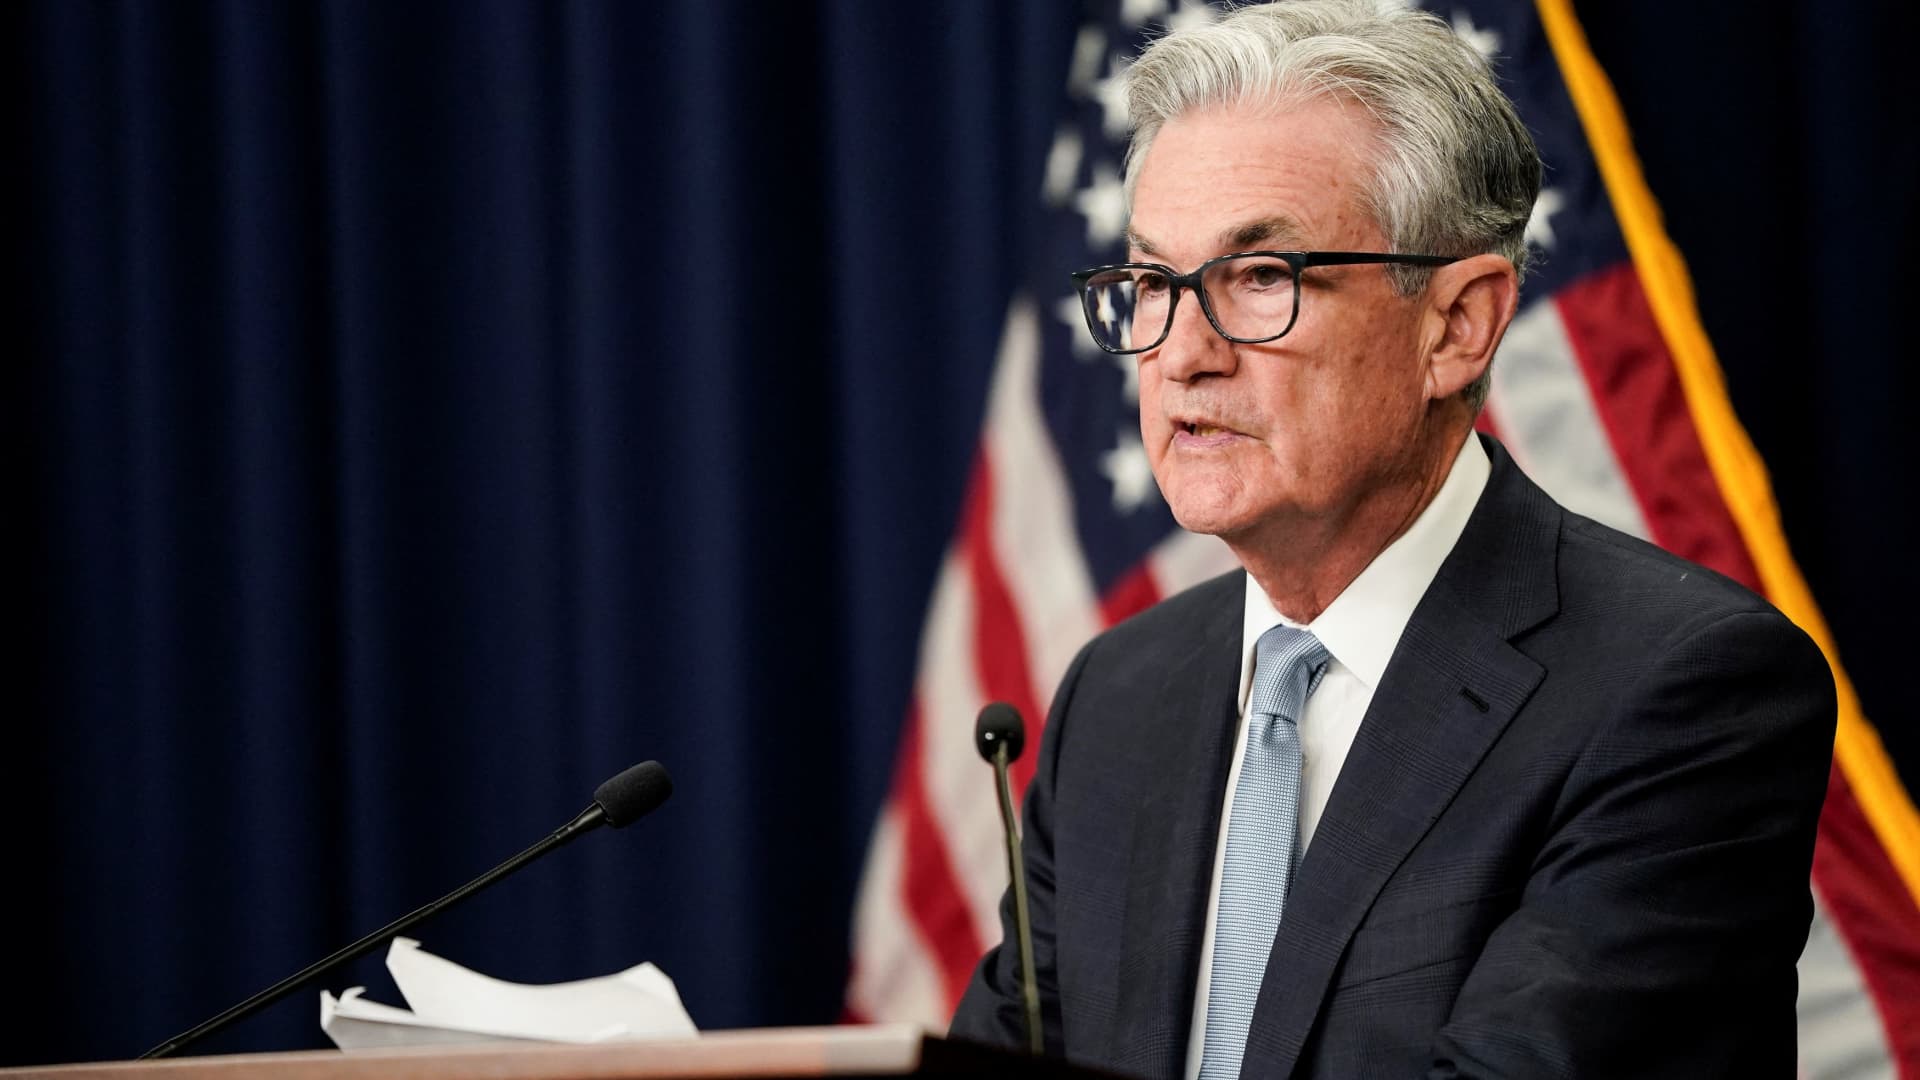 Watch Powell’s testimony to Congress on the Fed’s inflation fight, state of the economy